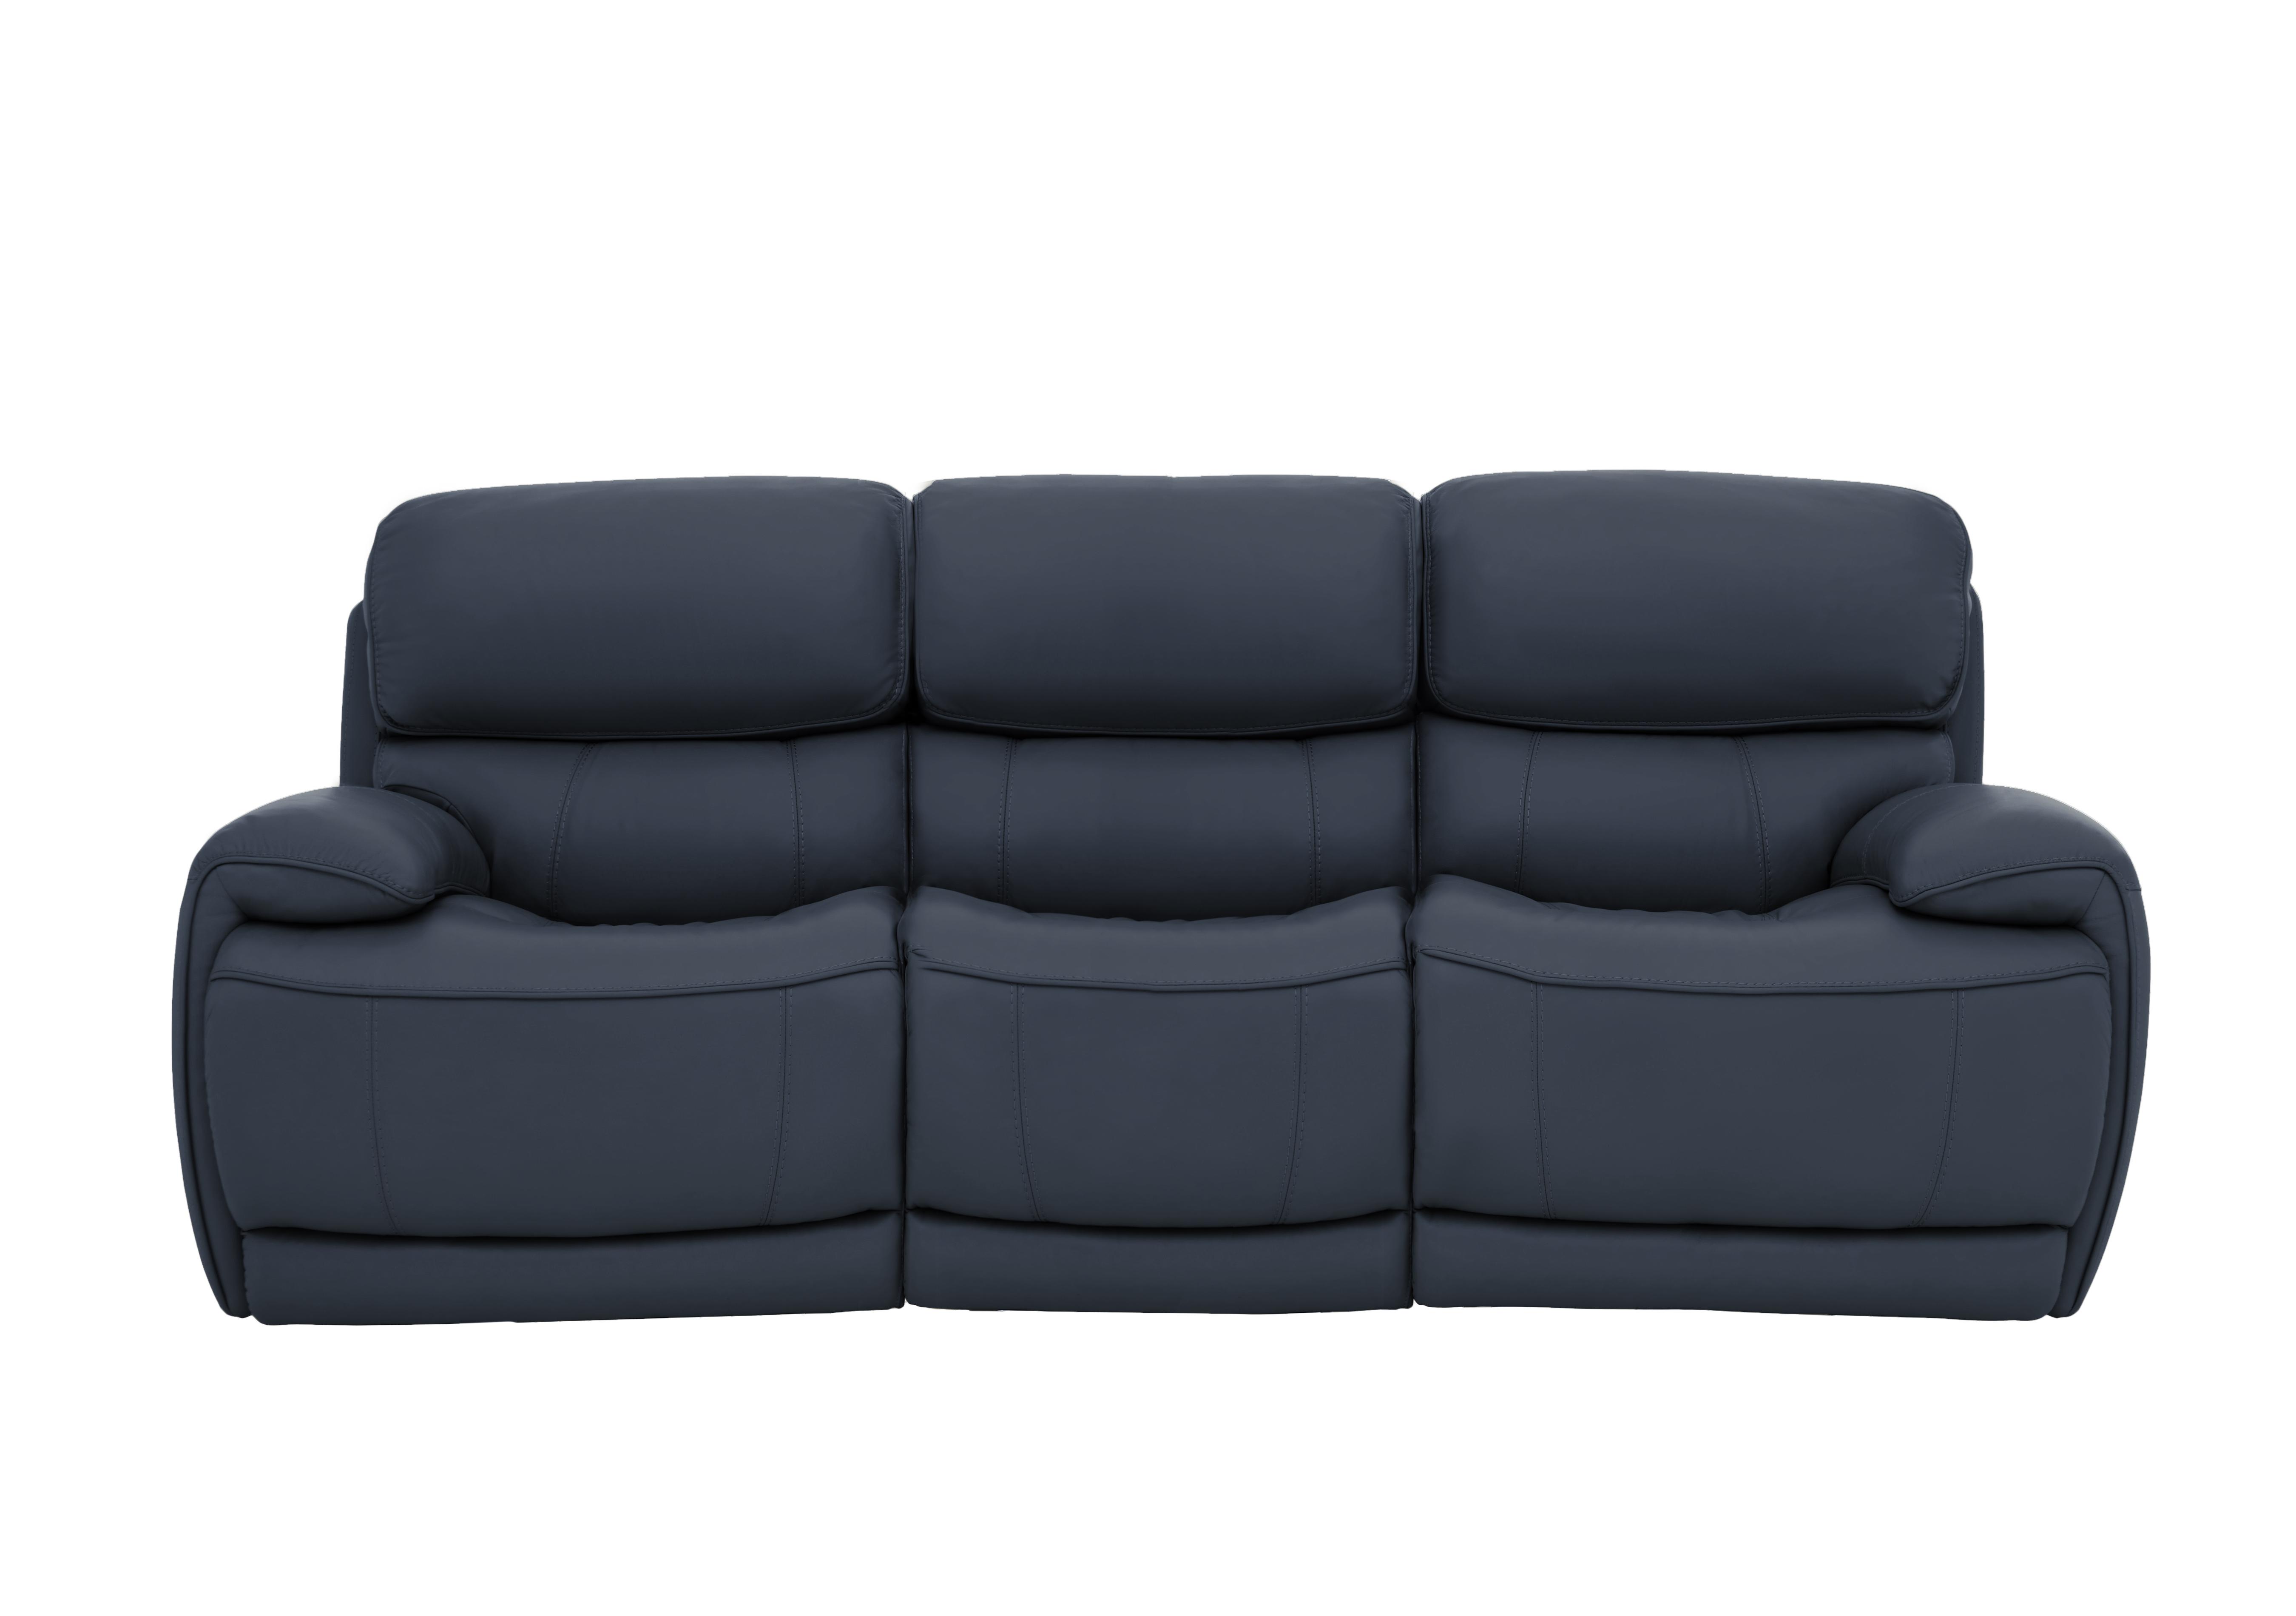 Rocco 3 Seater Leather Power Rocker Sofa with Power Headrests in Bv-313e Ocean Blue on Furniture Village